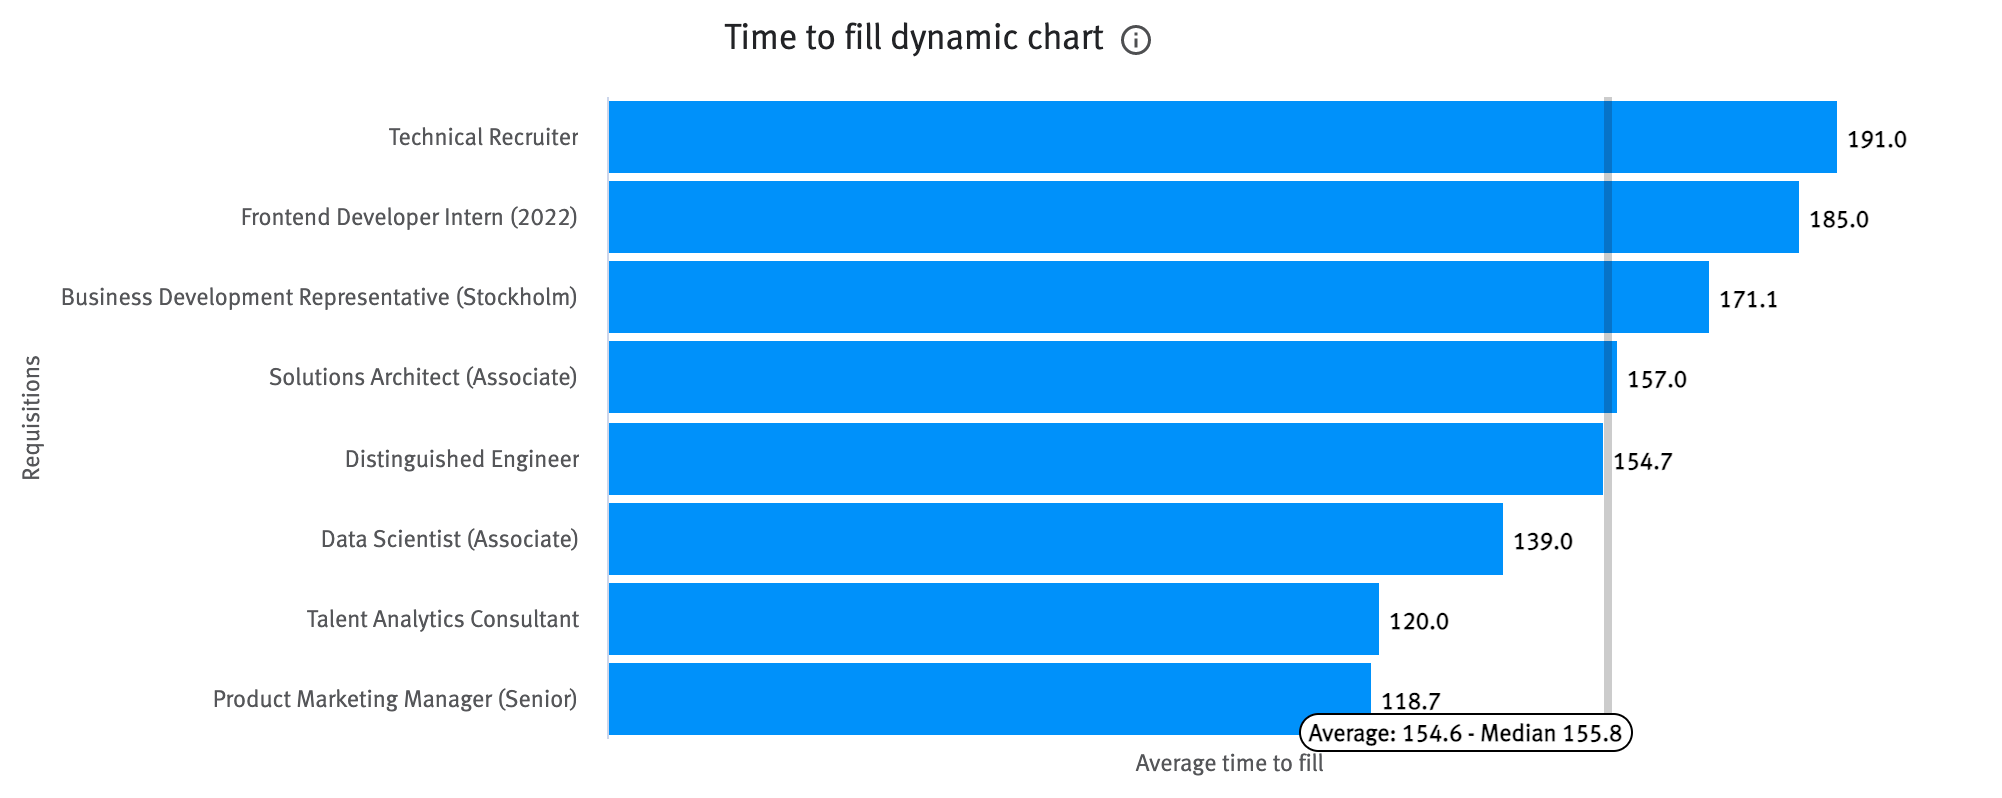 Time to fill dynamic chart